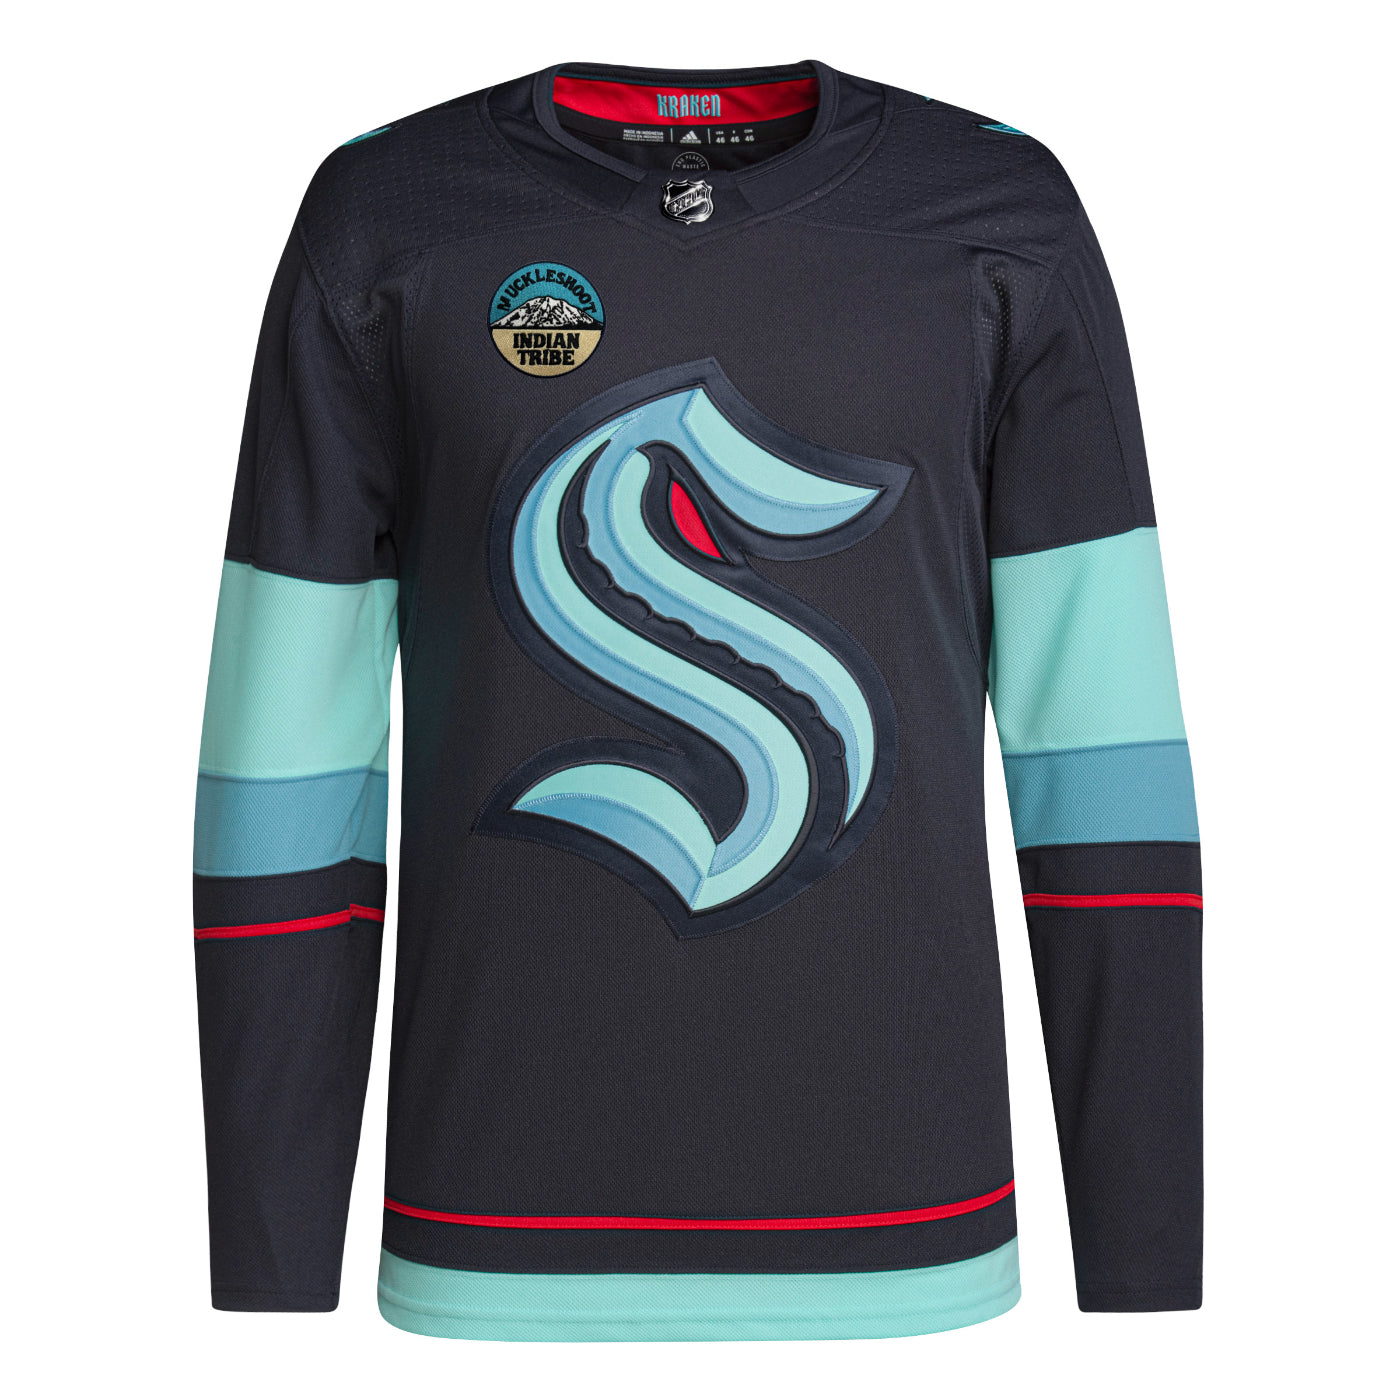 Keep active and fit: Shane Wright Seattle Kraken NHL Authentic Pro Home  Jersey with On Ice Cresting adidas